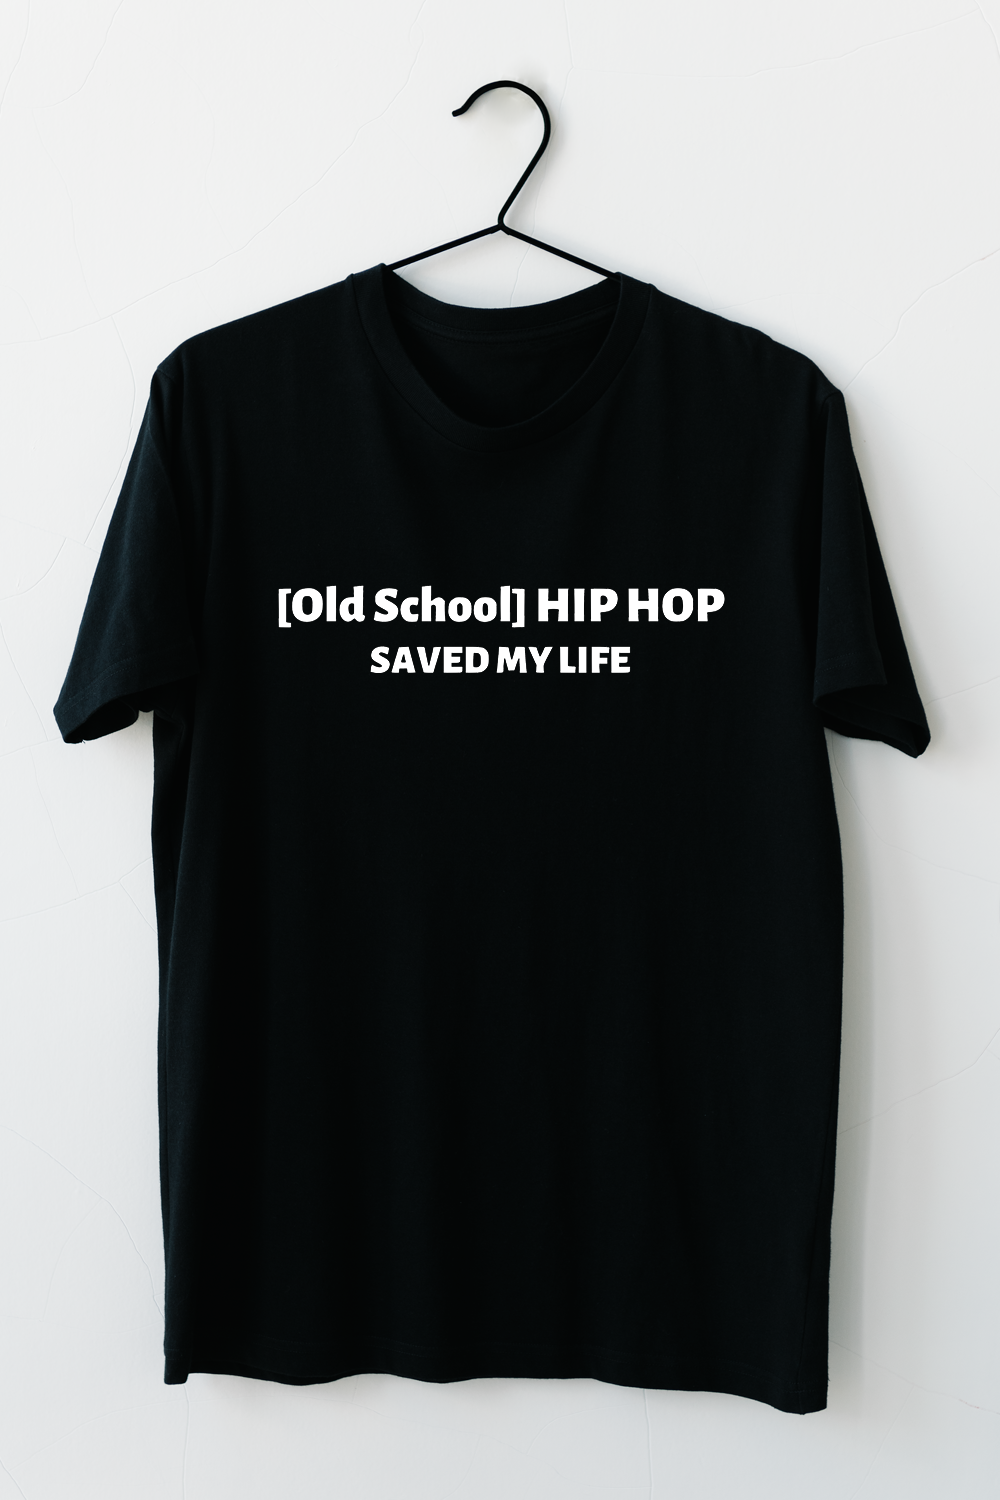 Old School Hiphop Saved my Life T-Shirt